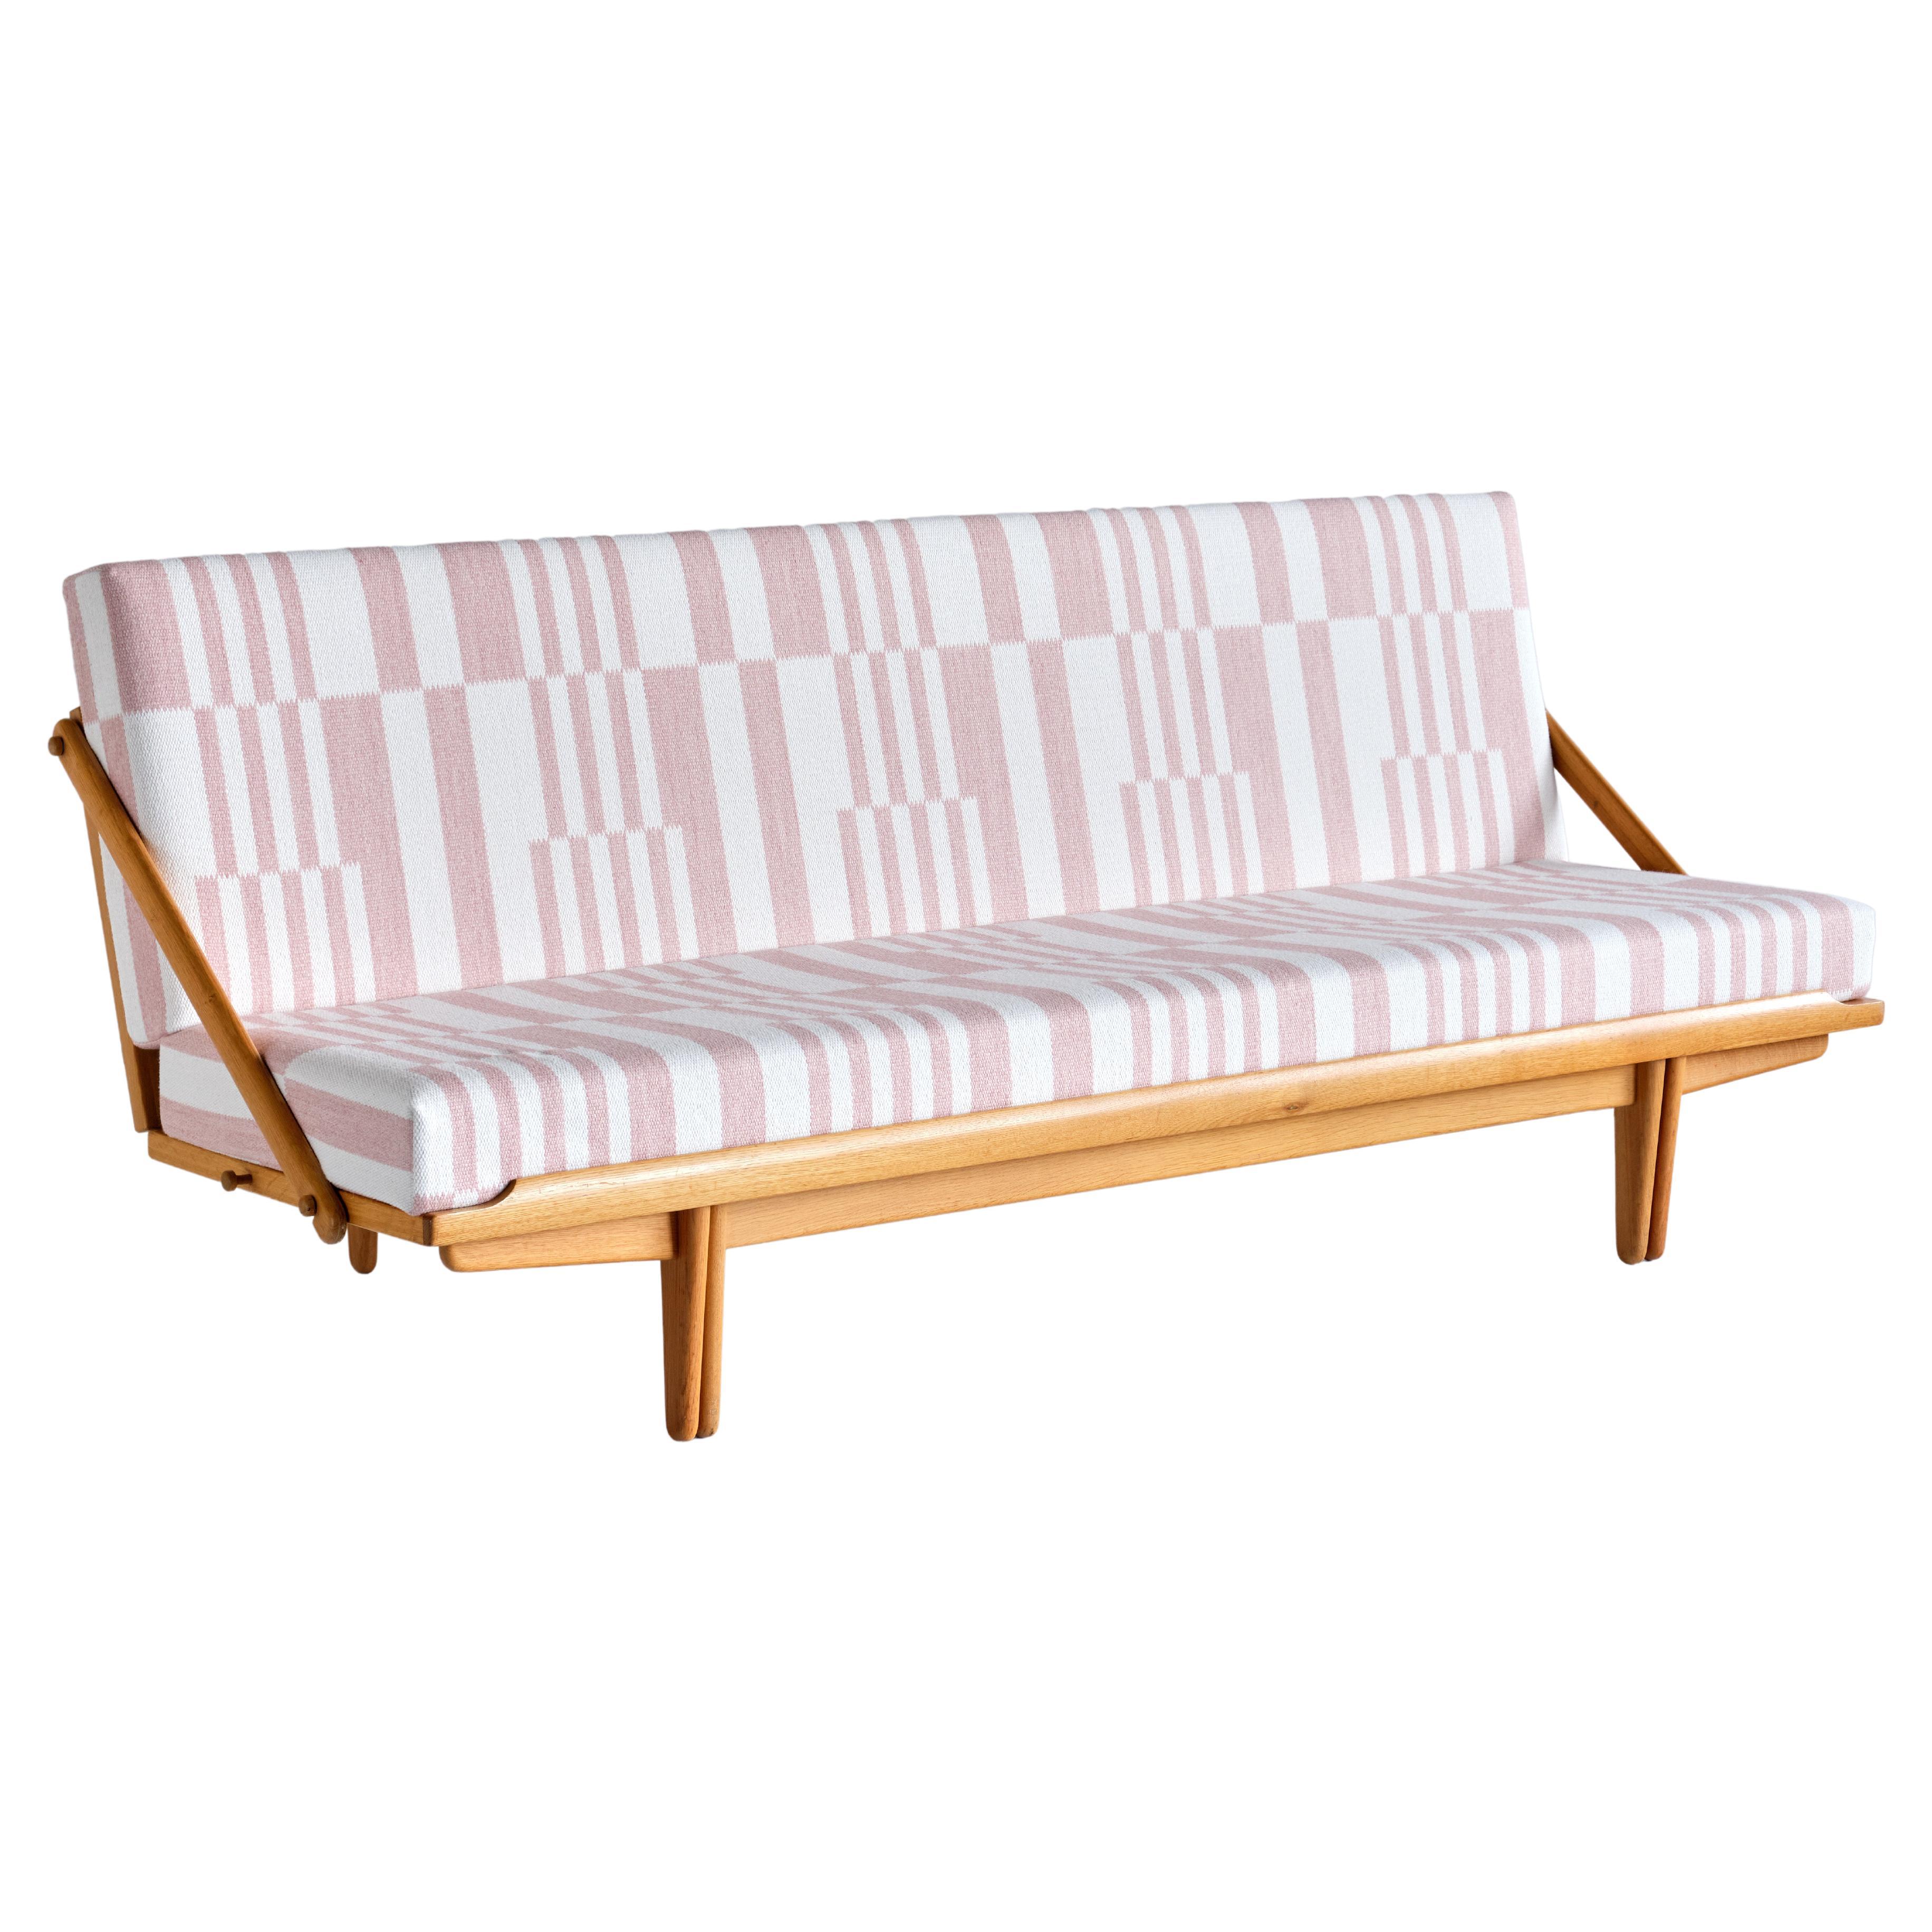 Poul Volther Sofa / Daybed in Oak and Pierre Frey Fabric, Gemla, Sweden, 1955 For Sale